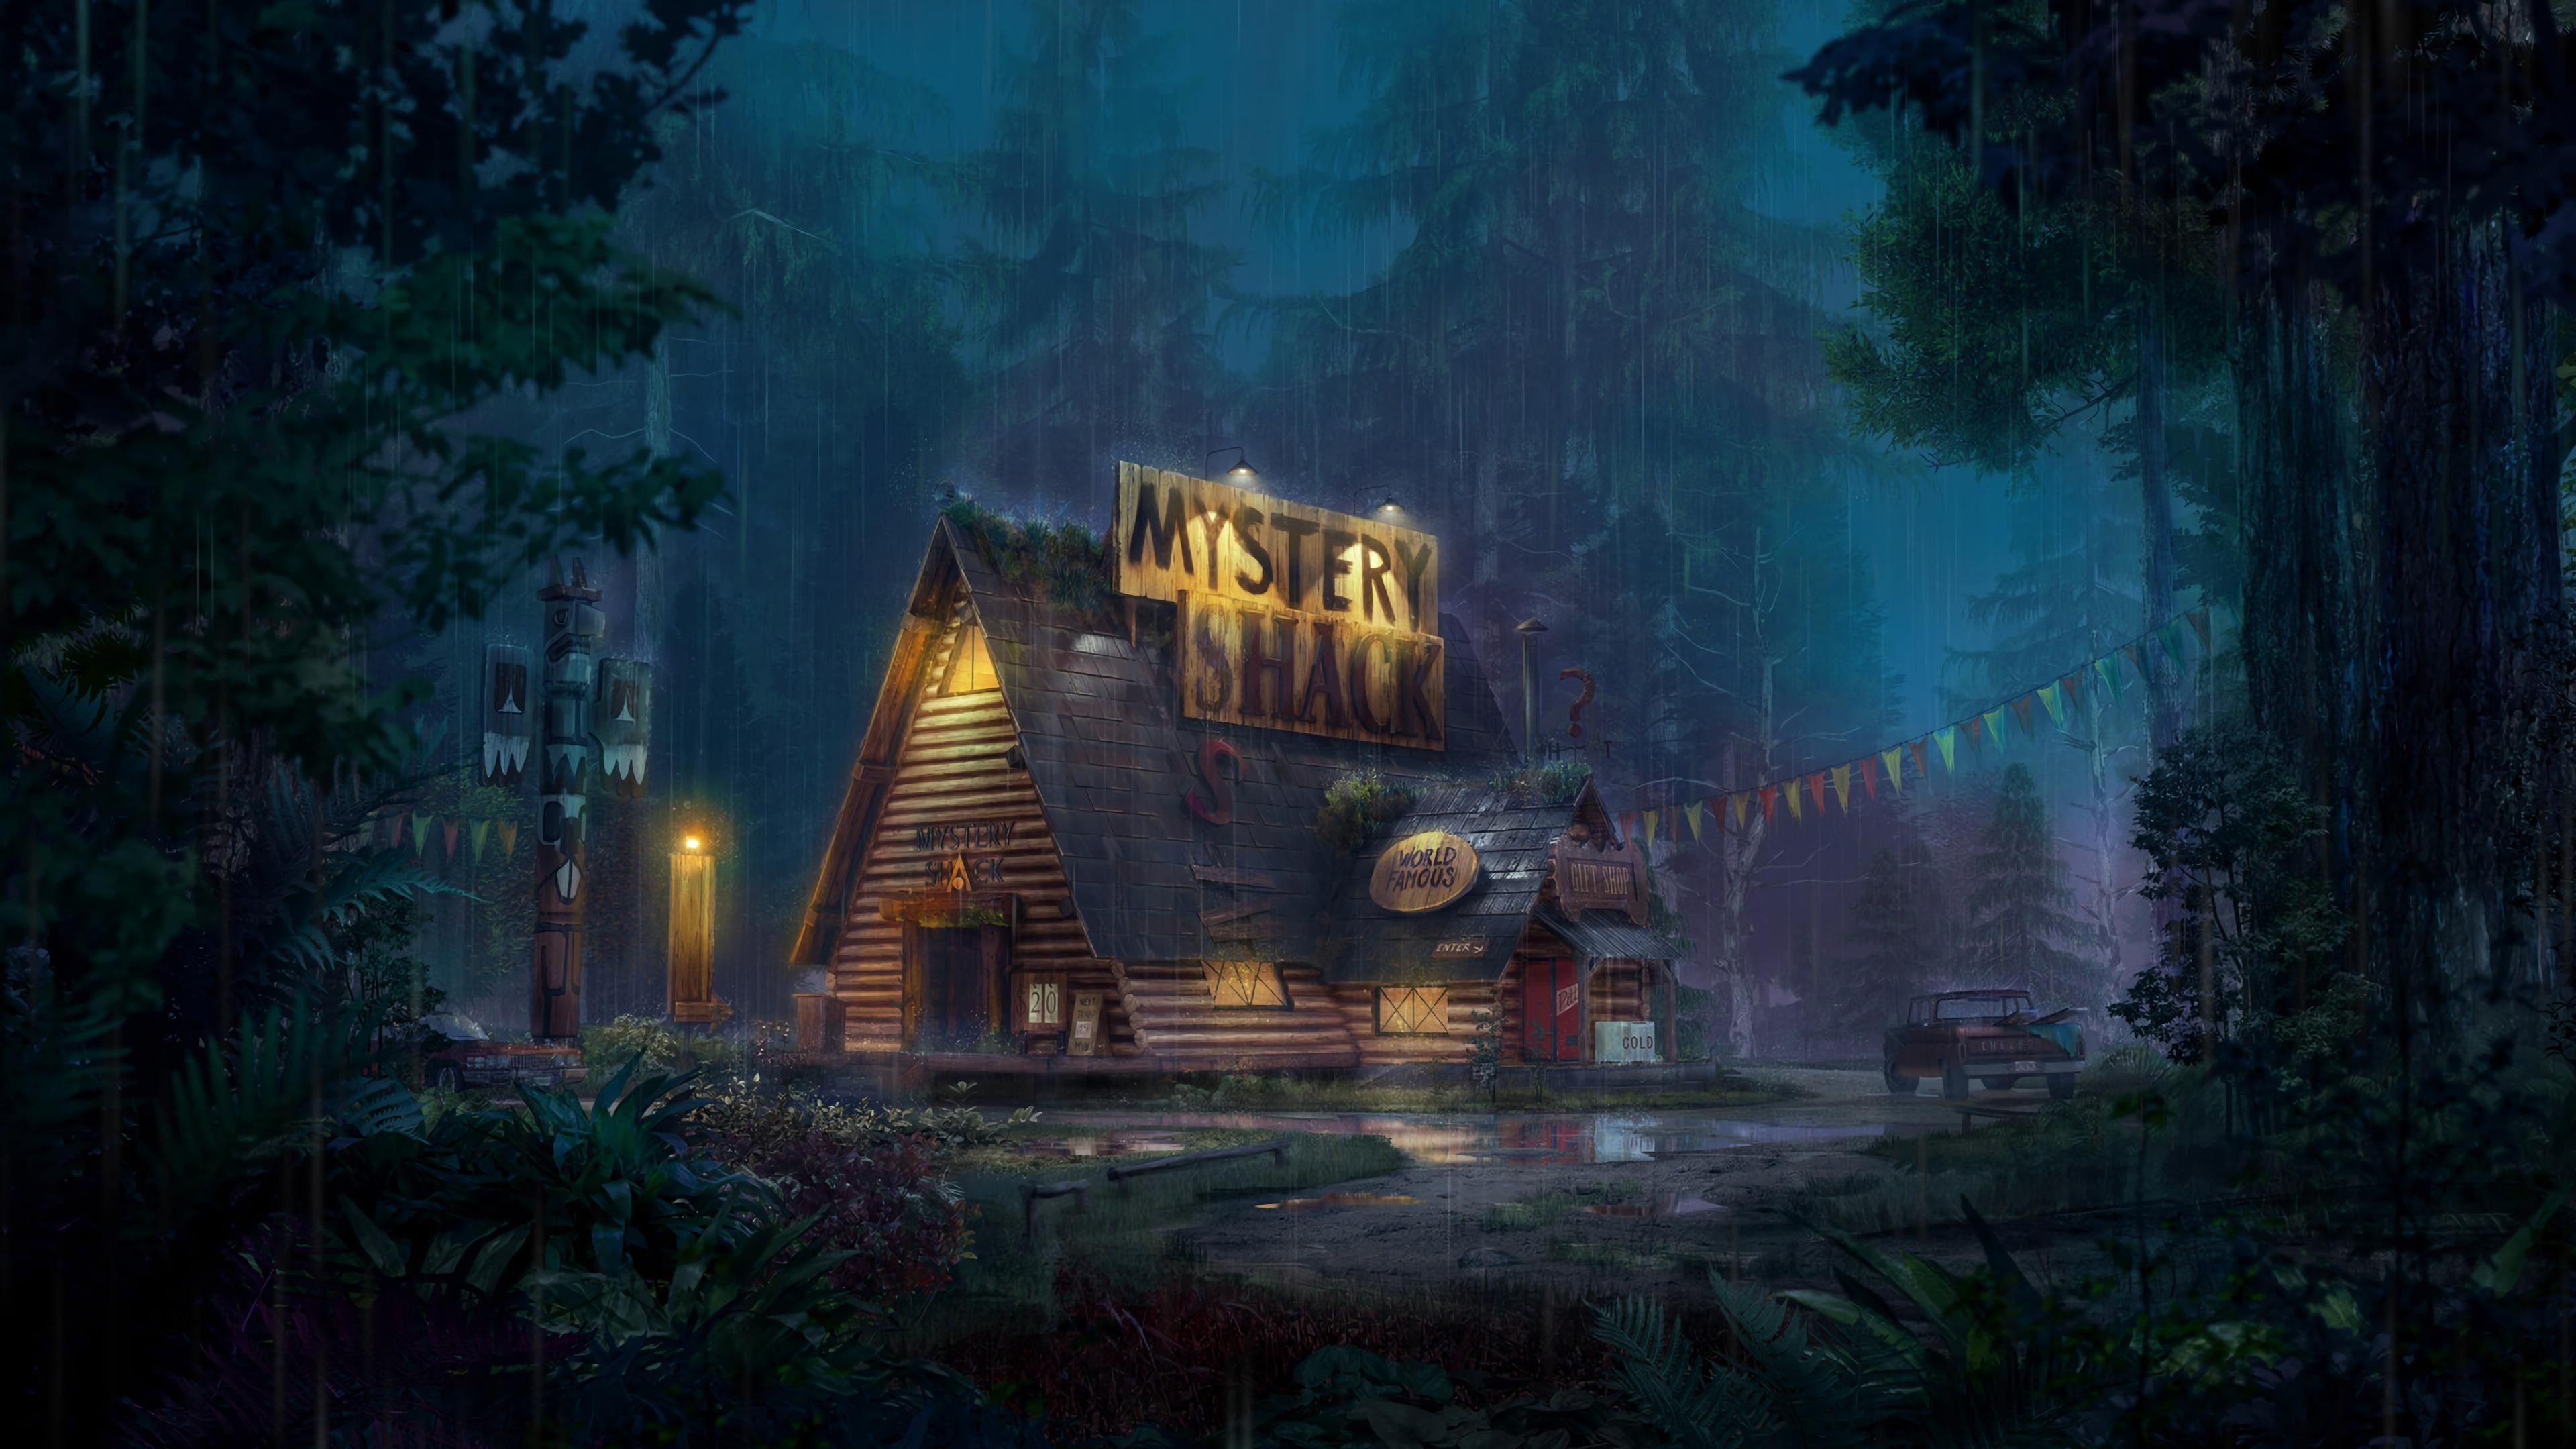 The mystery shack really good quality I promise (1920x1080)